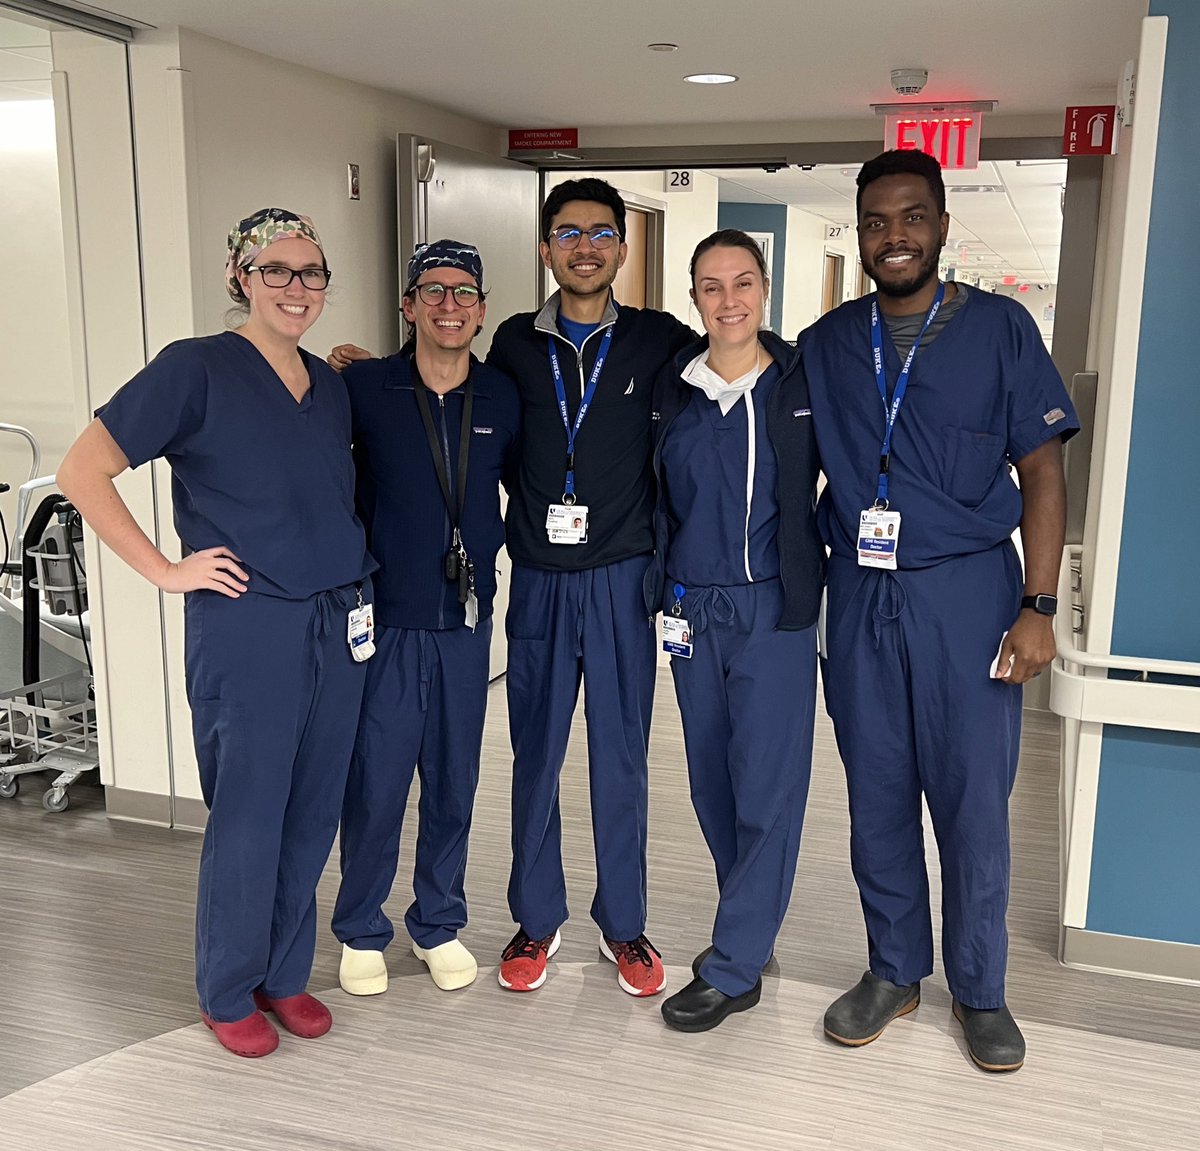 Wrapping up a great month at @DukeRaleigh with this all-⭐️ team! #squad @imranjanwar @Neel_Prabhu @laurabpride @OkoreehM @DukeSurgRes @DukeVascular @DukeCTSurgery